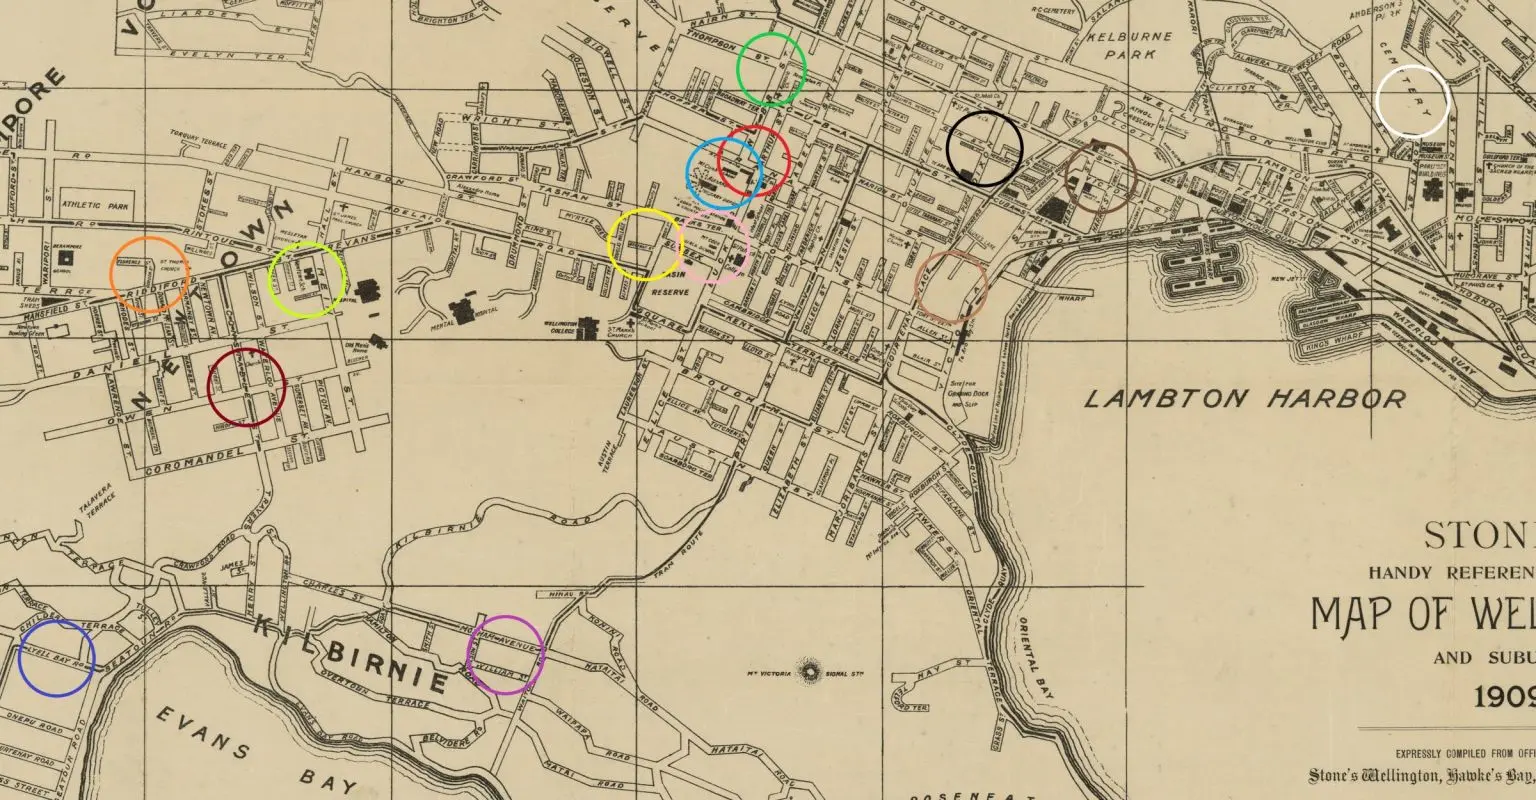 A map of Wellington showing various locations marked by coloured circles.